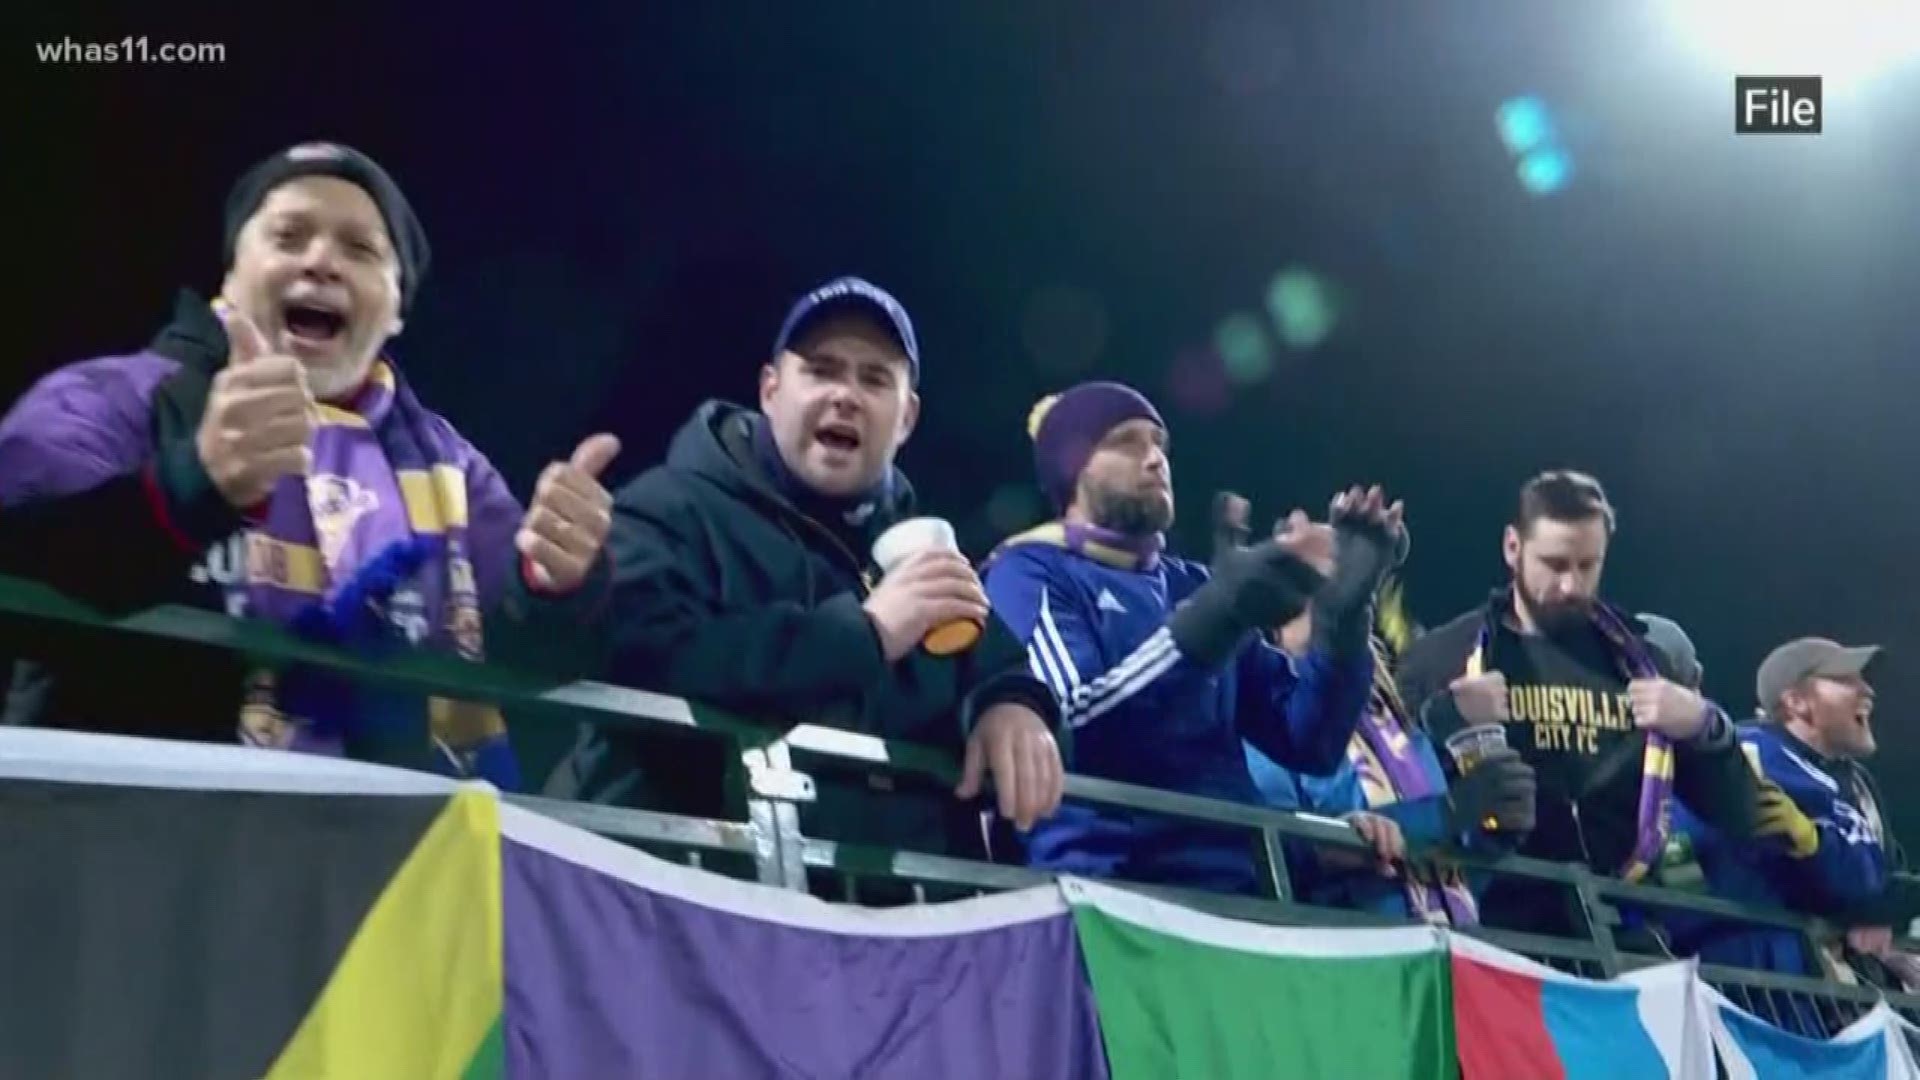 Louisville City FC is filming their new commercial and they want you to appear in it!